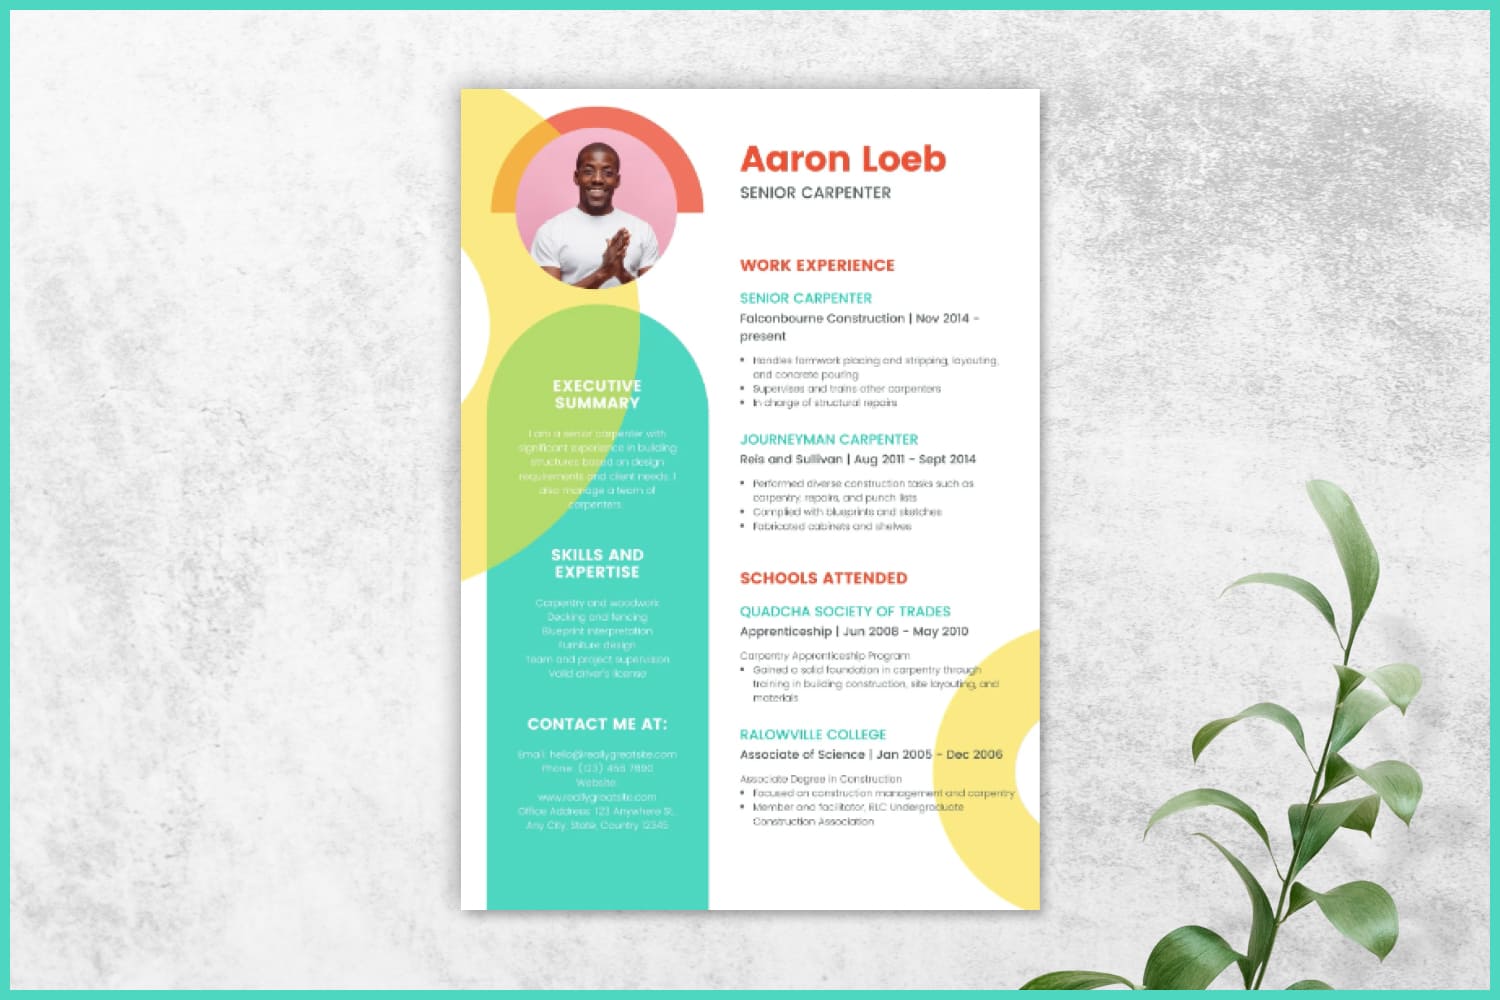 Two-column resume with green, yellow and red accents.